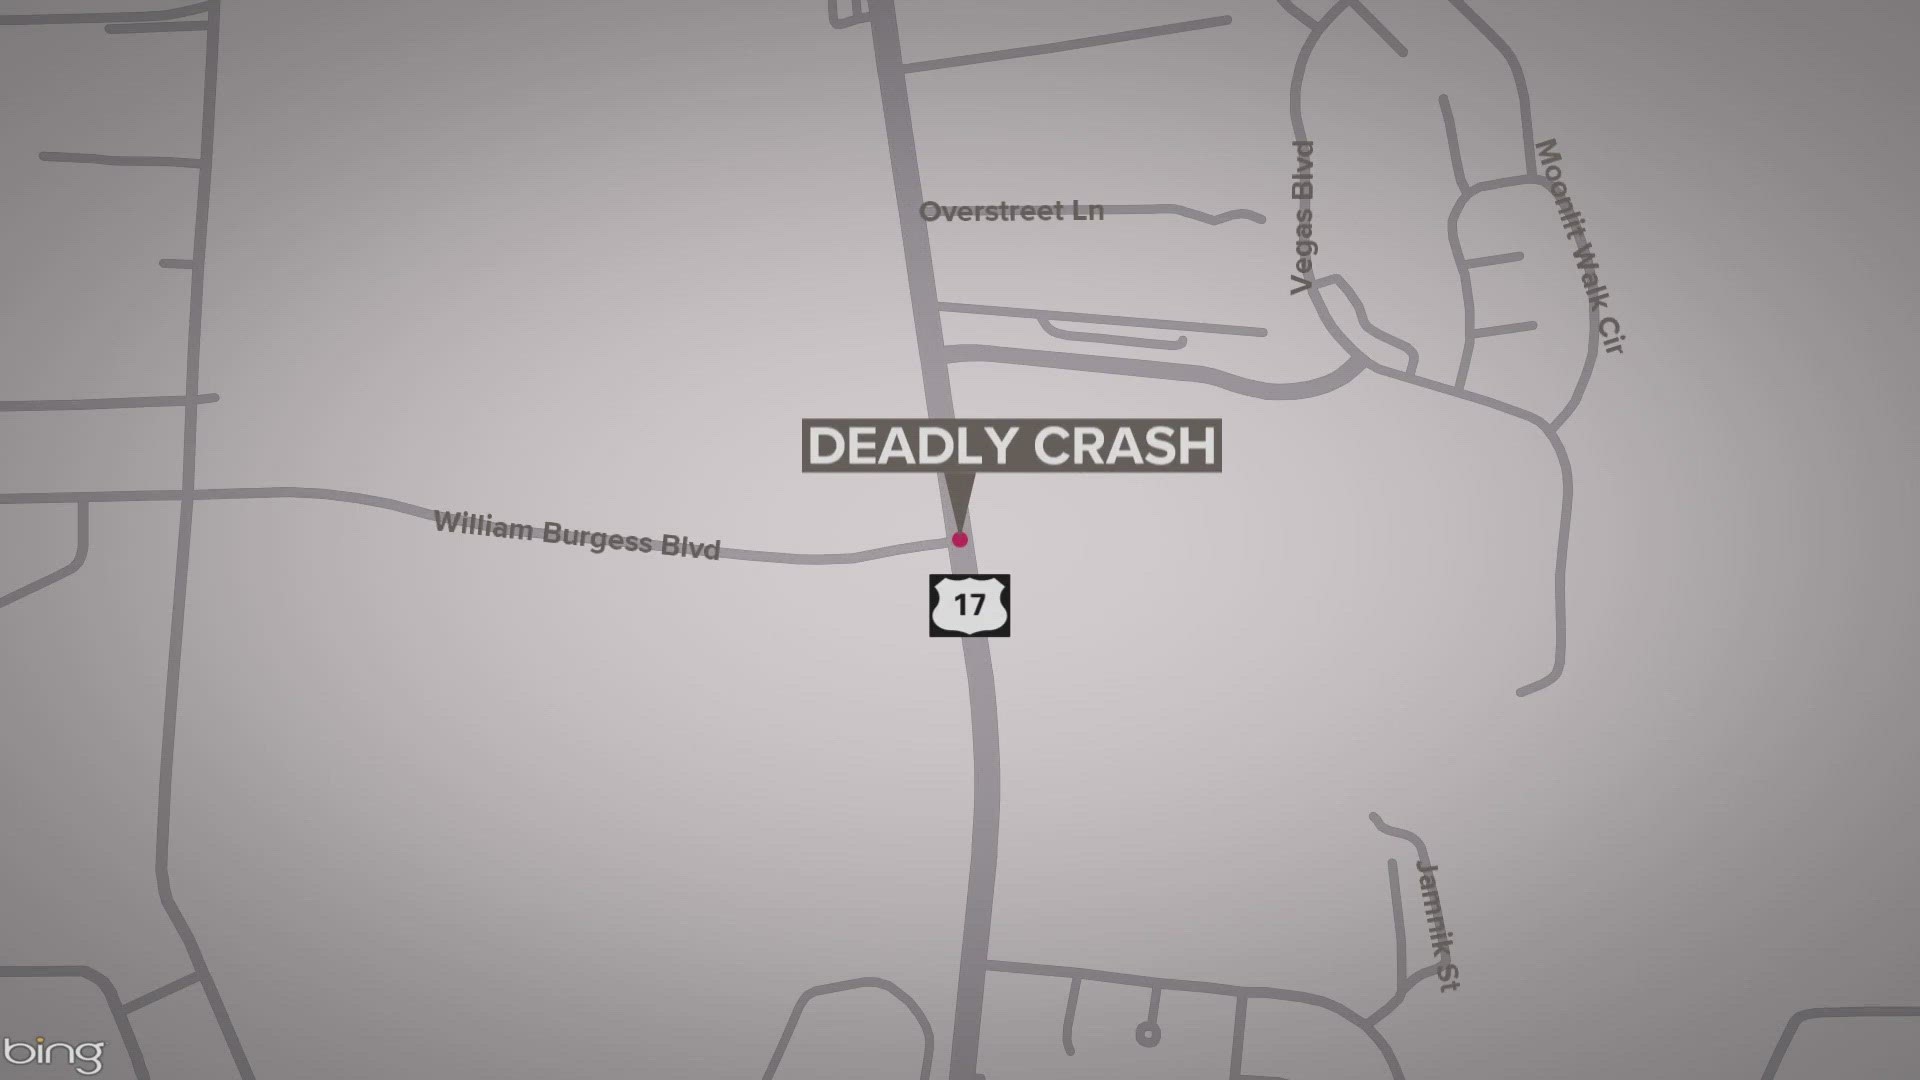 FHP says an SUV driven by a 69-year-old Yulee woman, collided with the front of the man's motorcycle at 6:20 a.m. on US-17 Thursday.